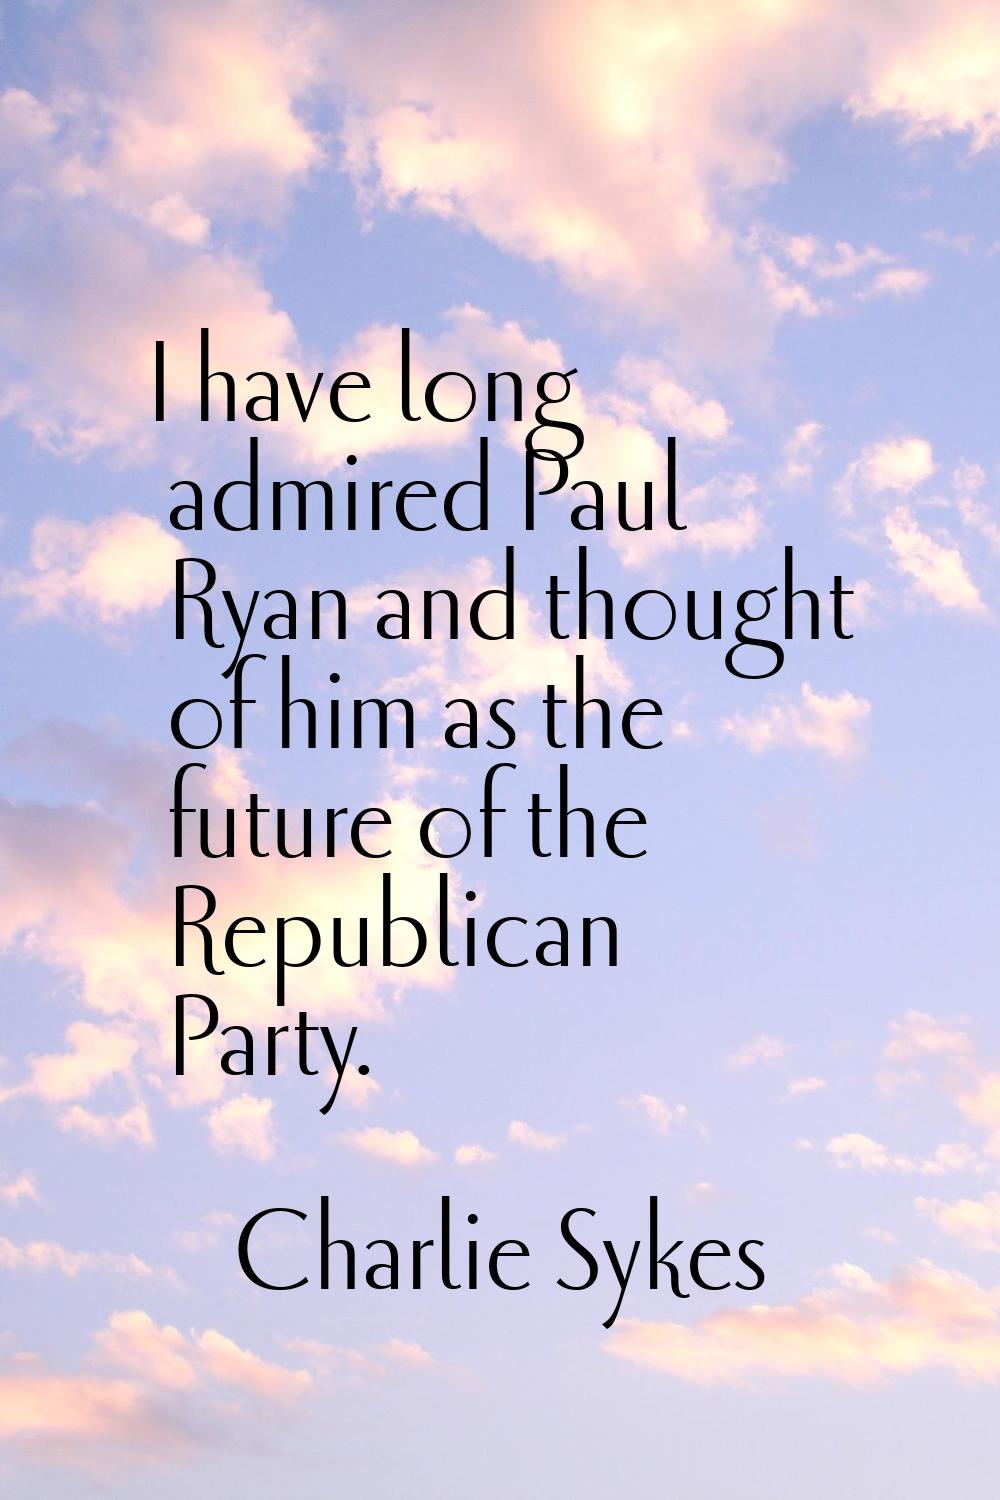 I have long admired Paul Ryan and thought of him as the future of the Republican Party.